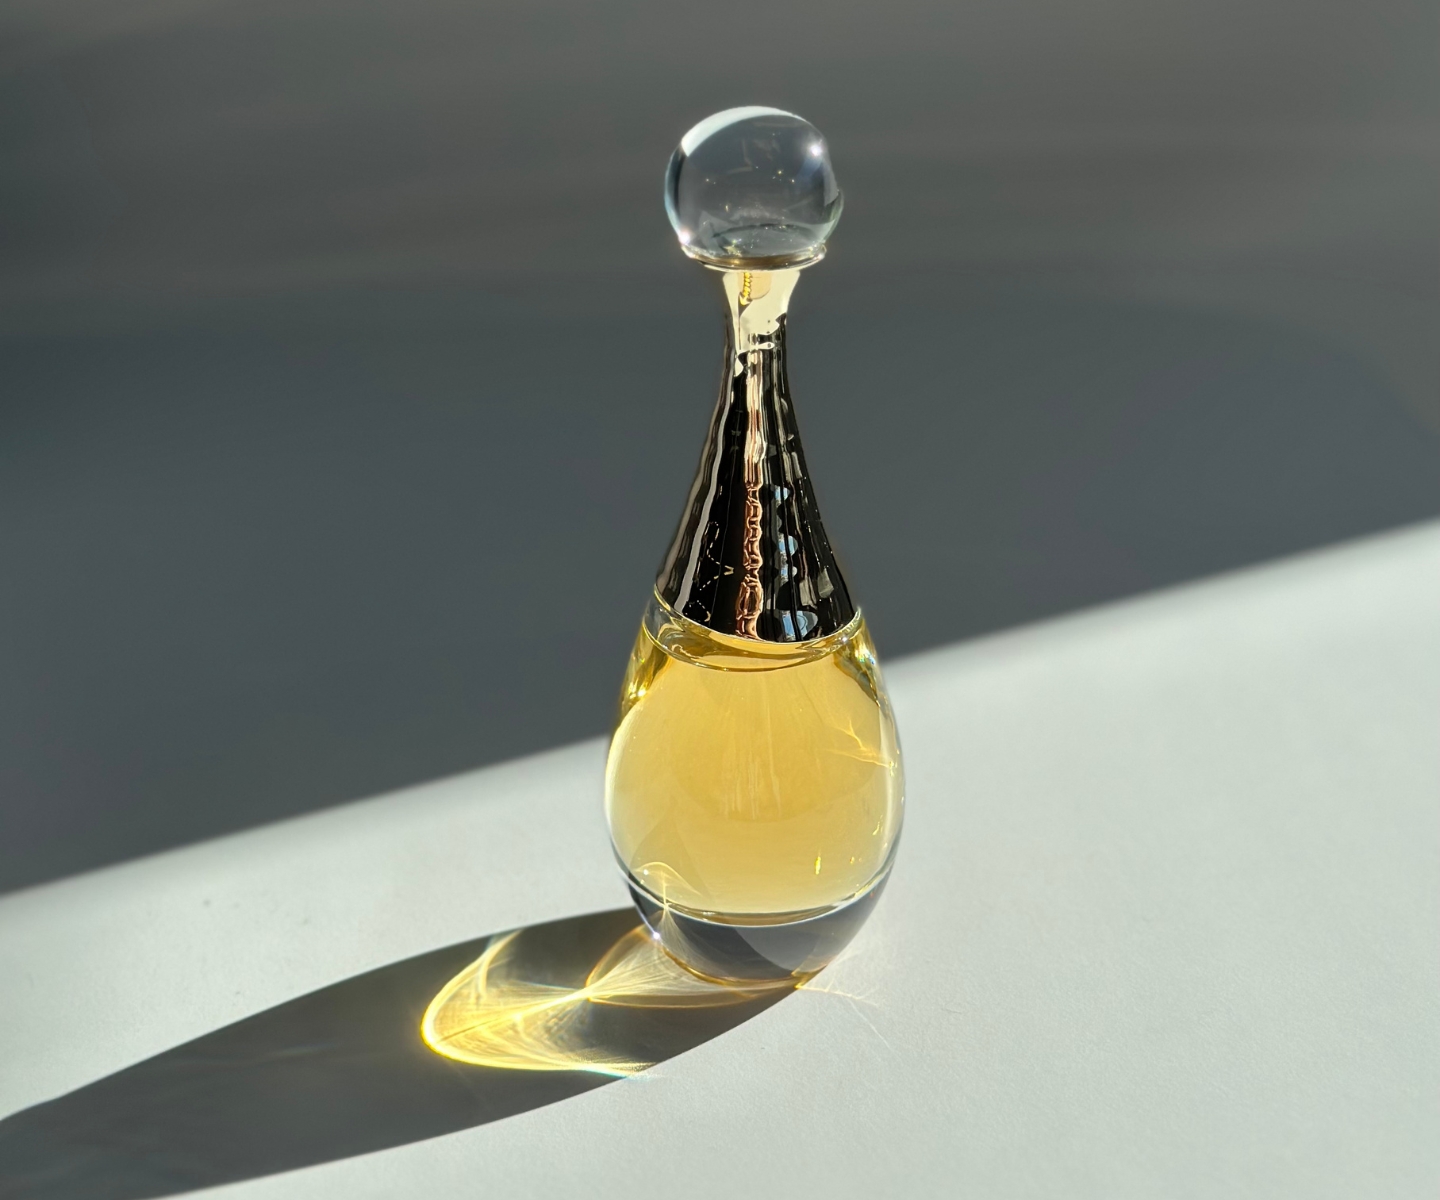 DIOR Decoded: Your Gift Guide to Their Iconic Fragrance Collection at ...